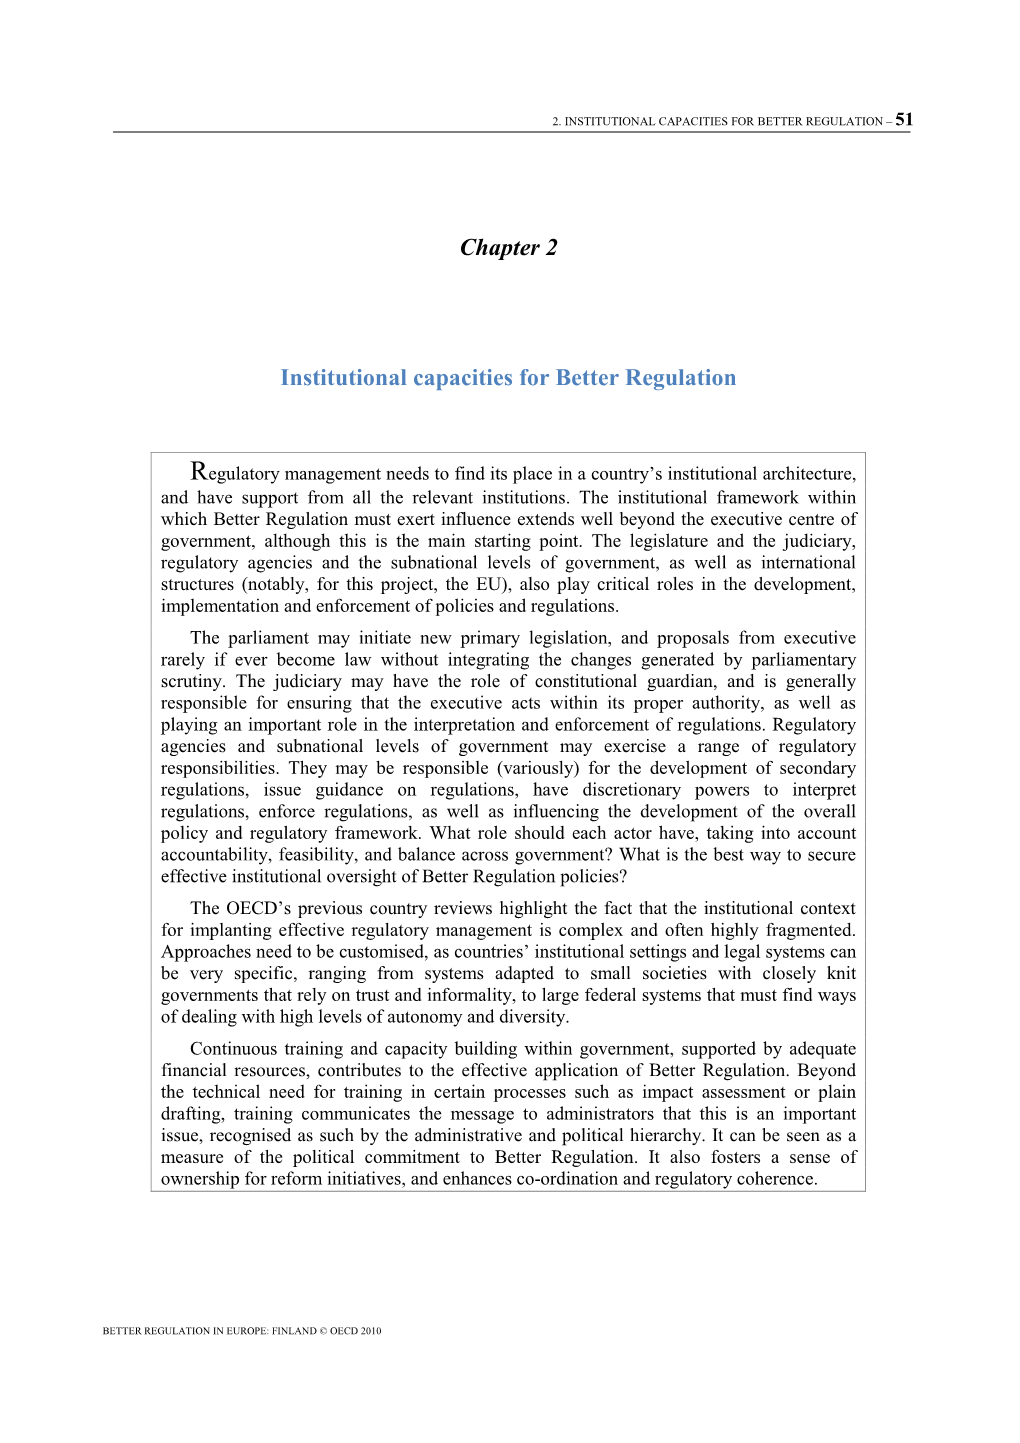 Chapter 2 Institutional Capacities for Better Regulation